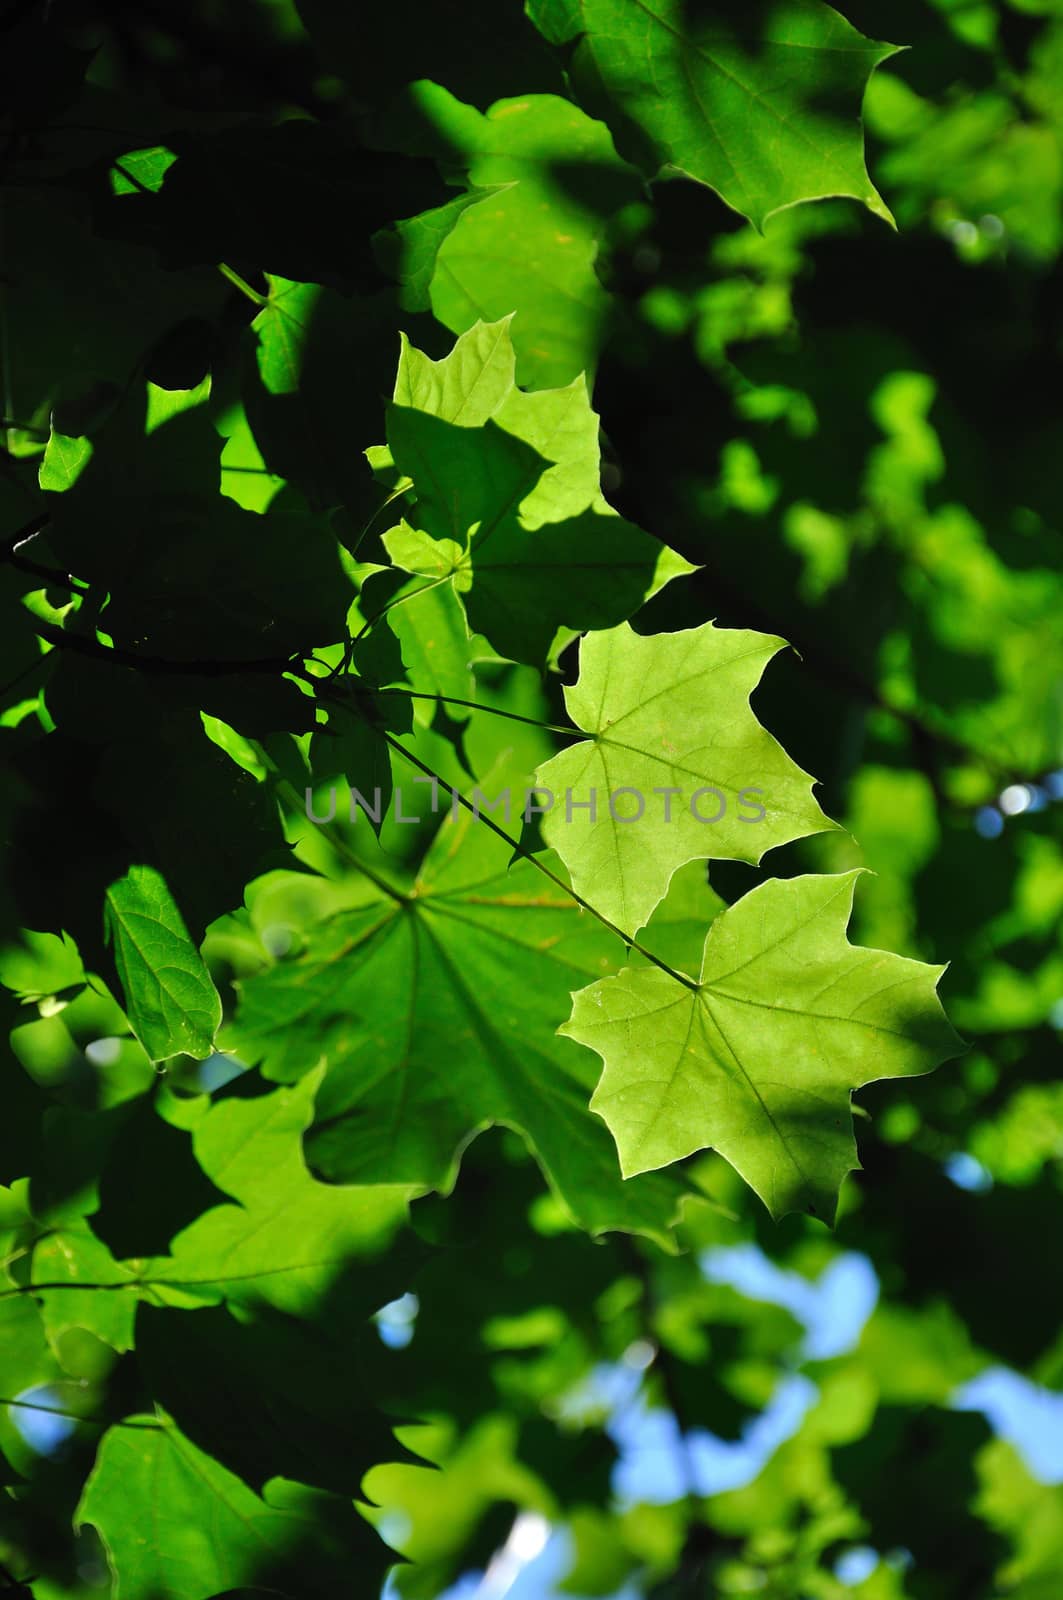 Colorful fresh green maple branch close-up in sunlight by Eagle2308